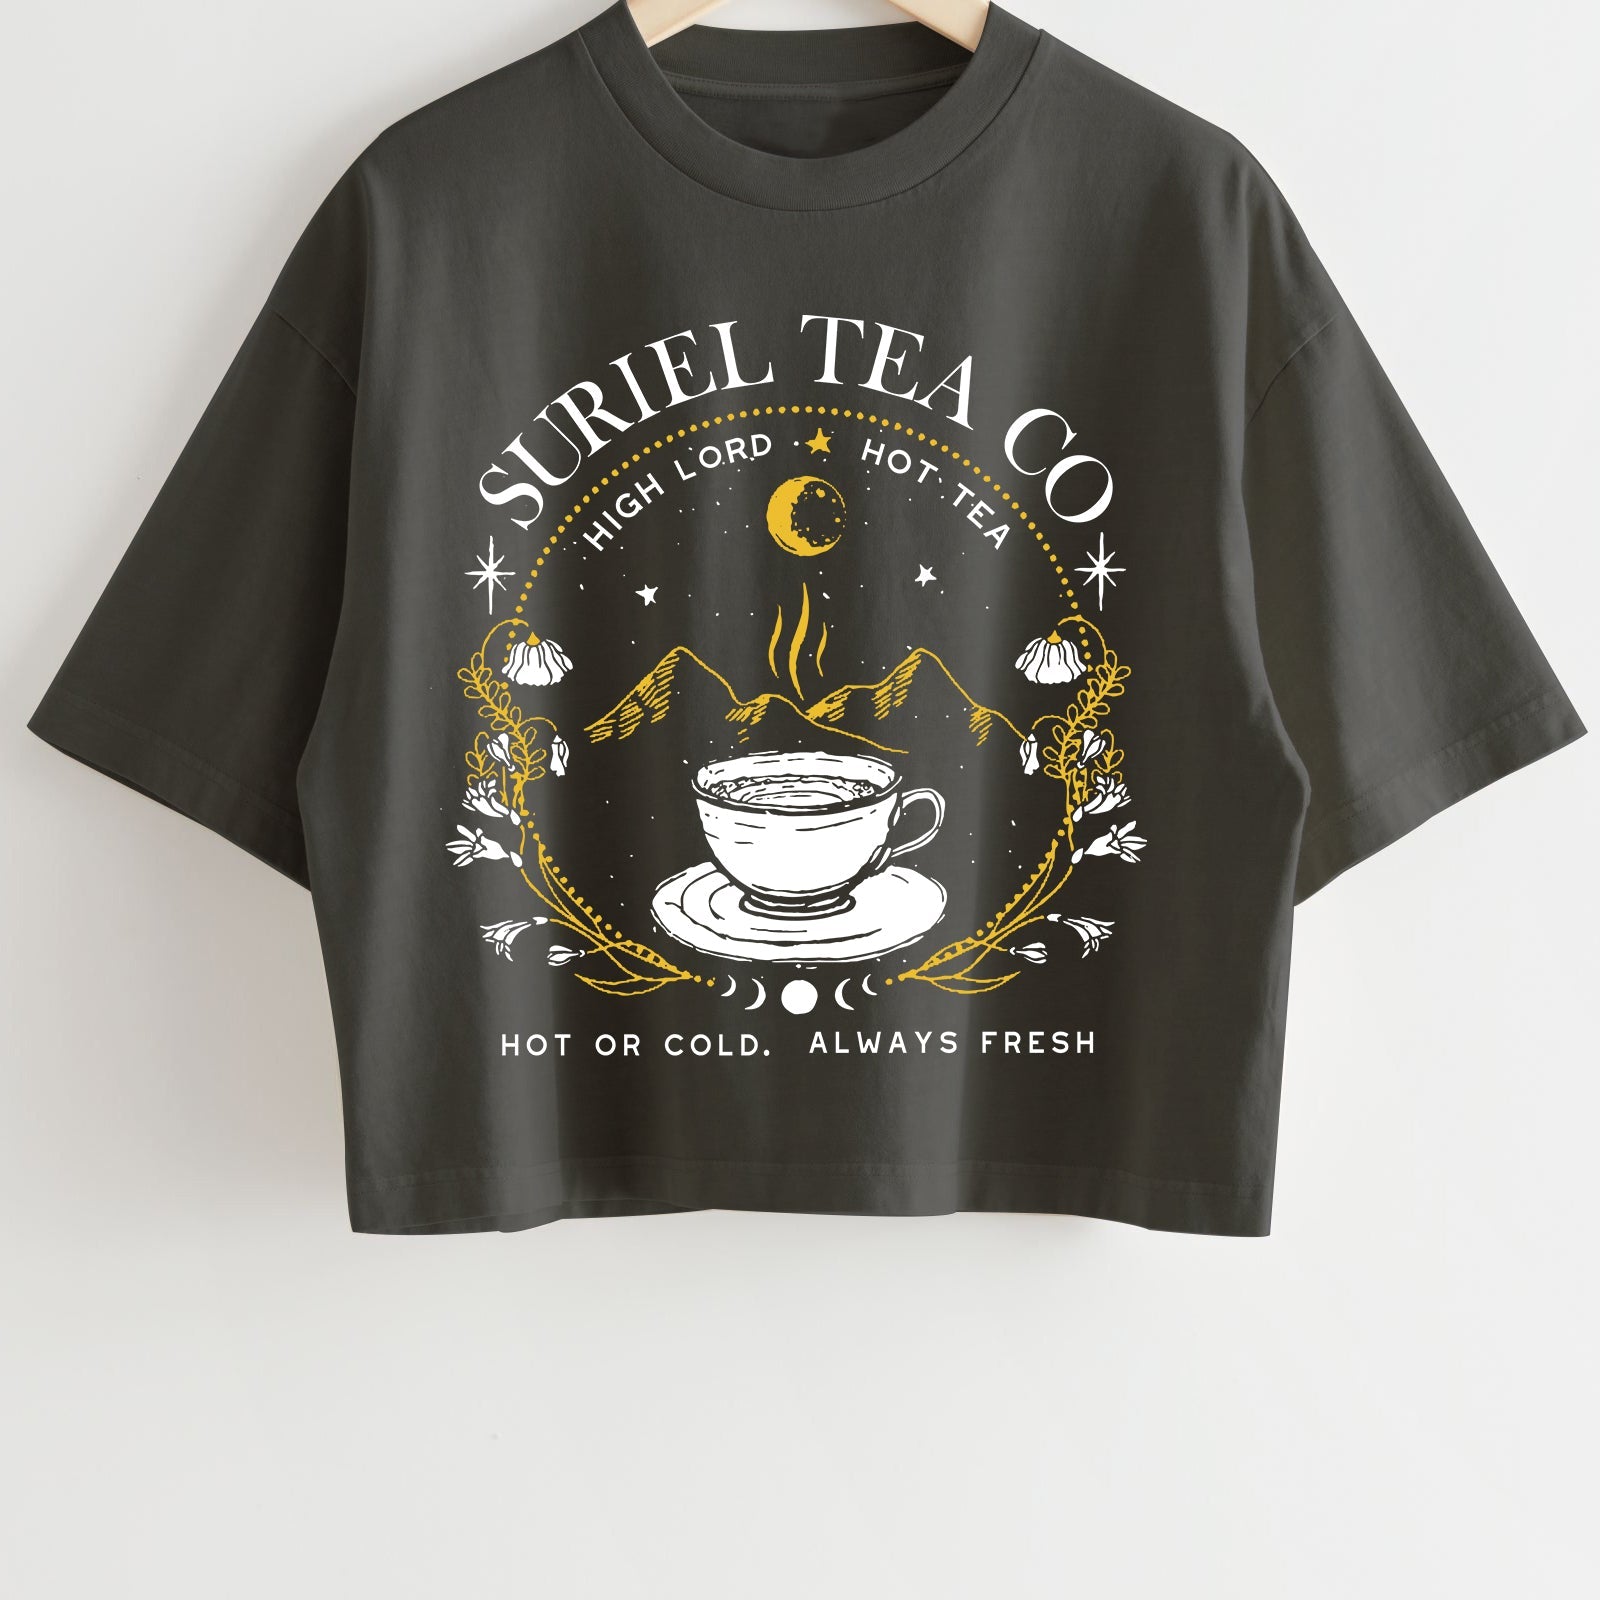 Suriel Tea Co A Court Of Thorns And Roses Crop Top For Women